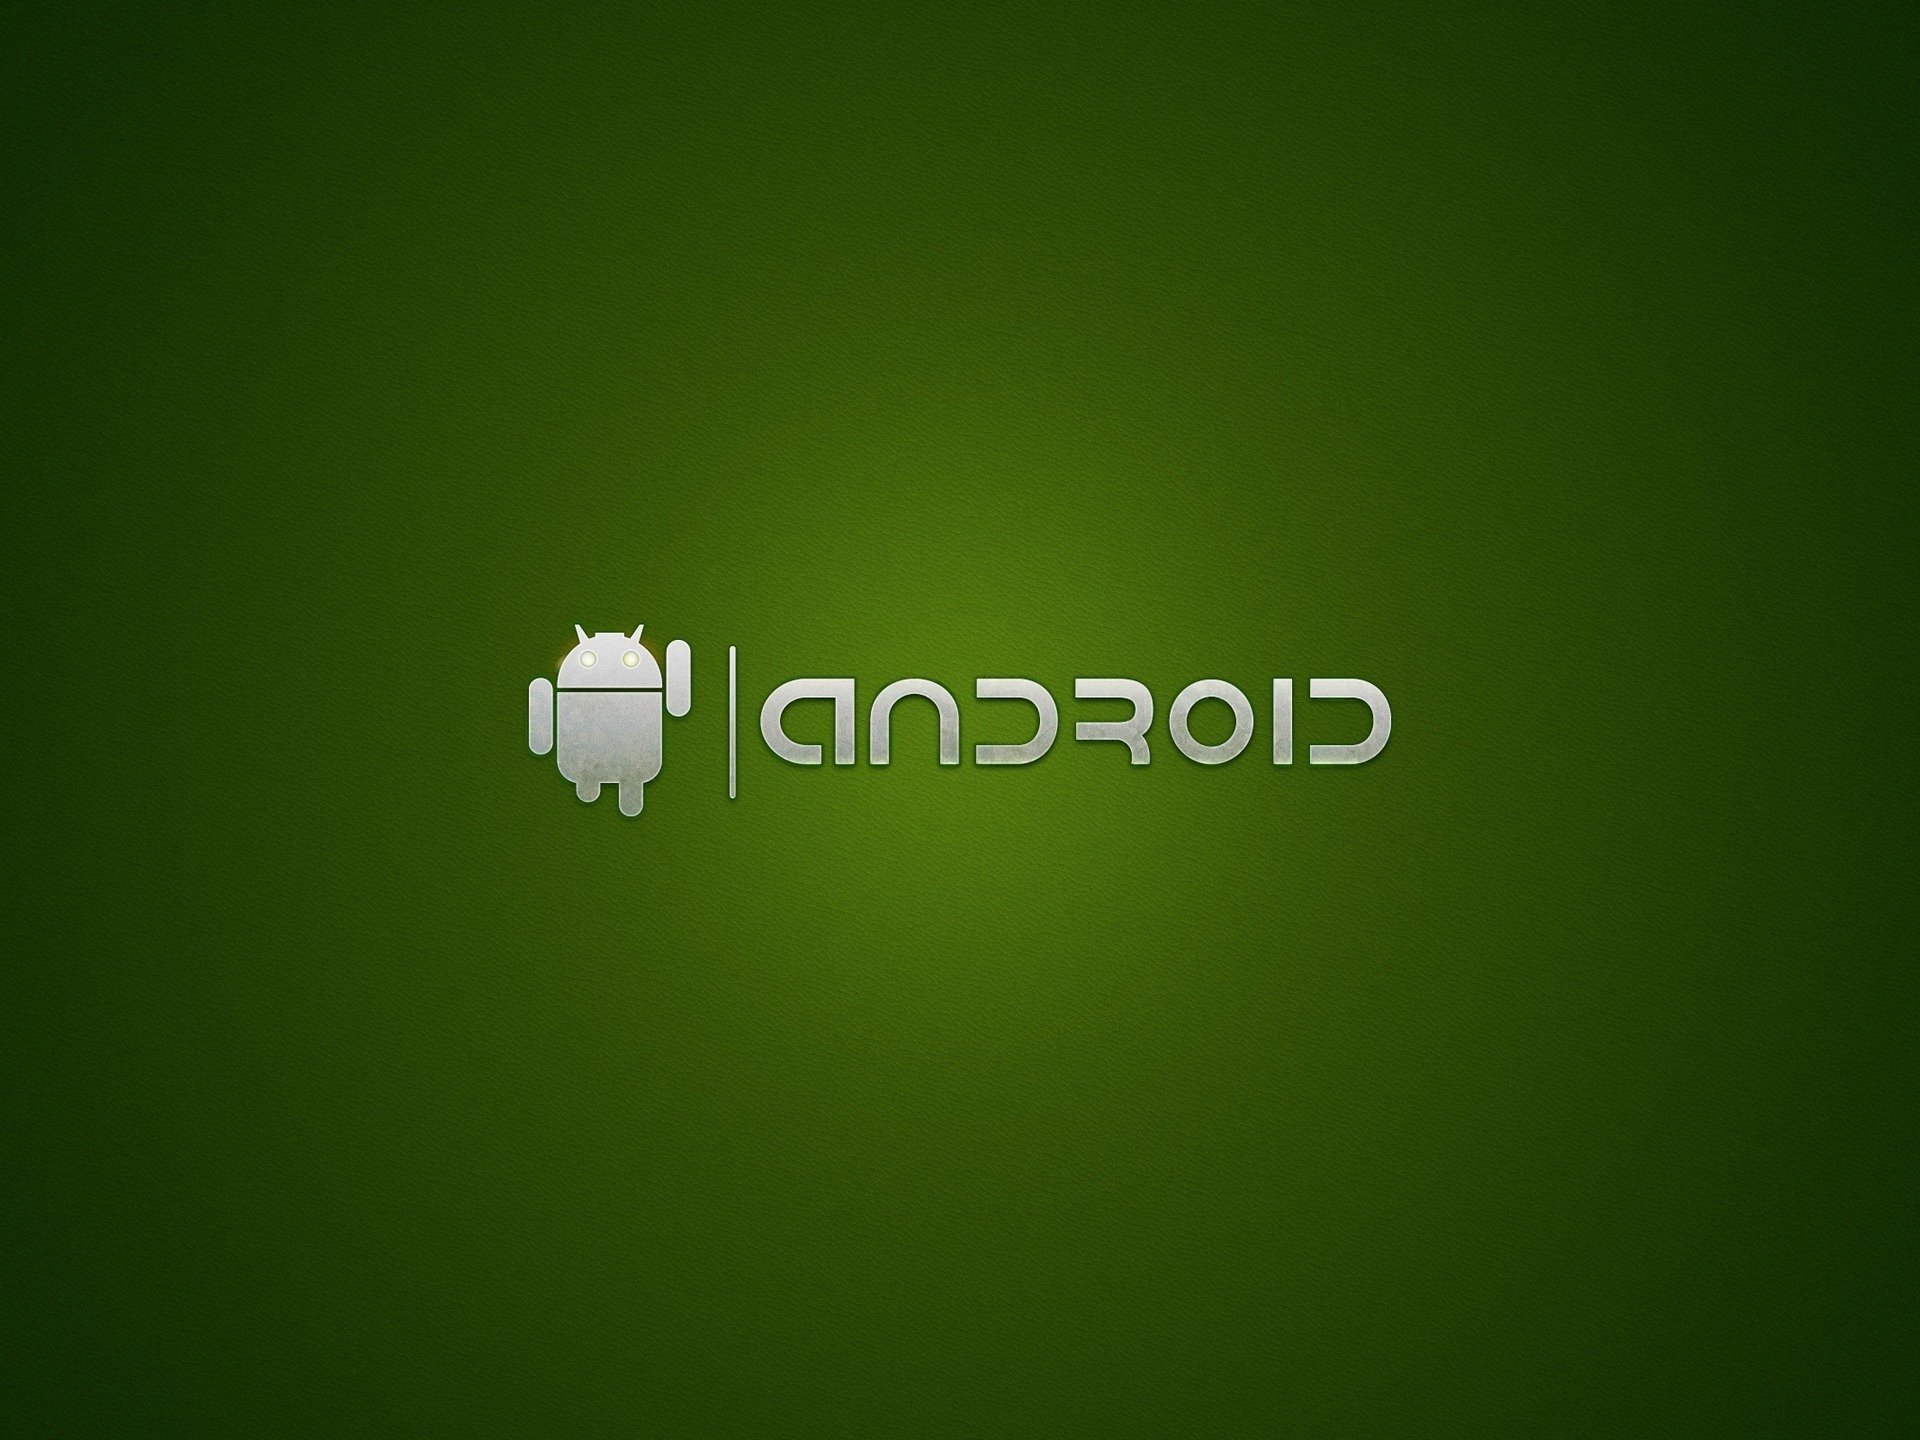 Free download Android wallpaper ID:169050 hd 1920x1440 for PC